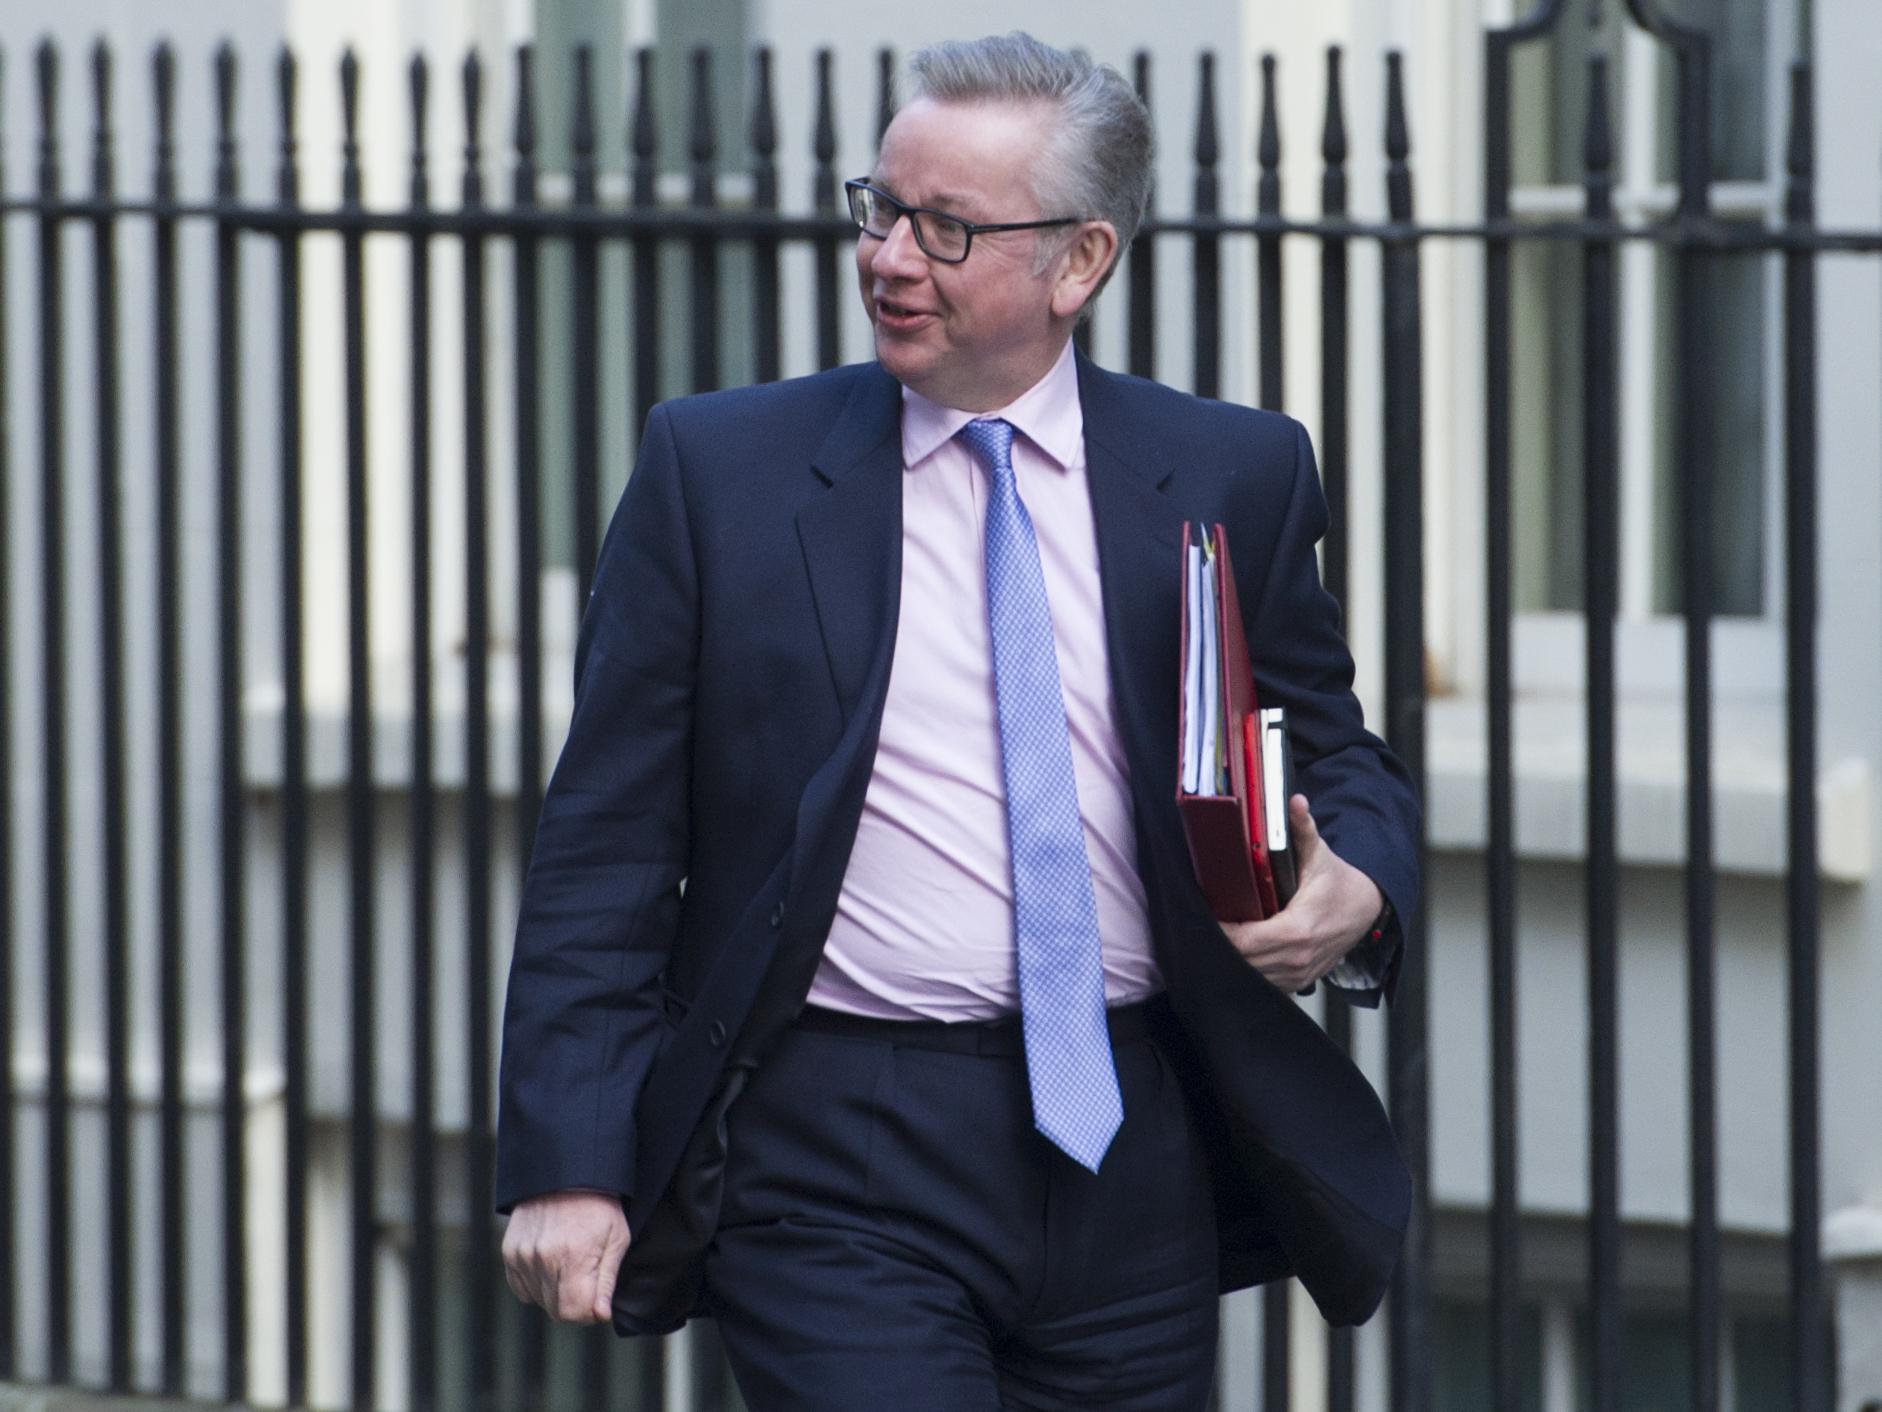 Environment, Food and Rural Affairs Secretary Michael Gove arrives on Downing Street for the weekly cabinet meeting on February 27, 2018 in London, England